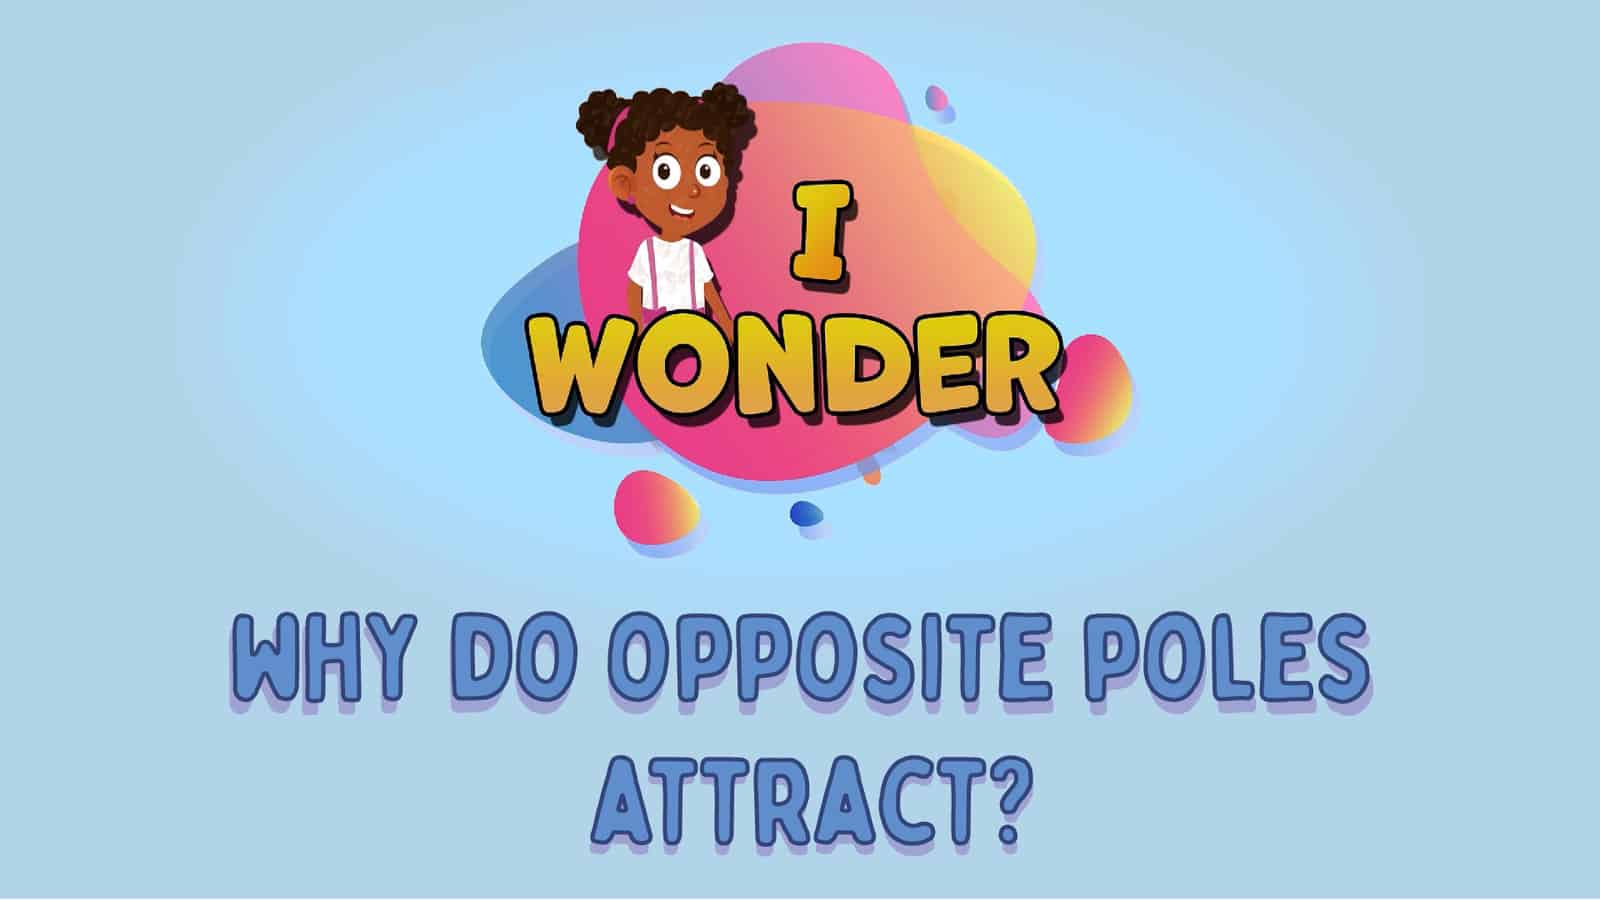 Why Do Opposite Poles Attract?